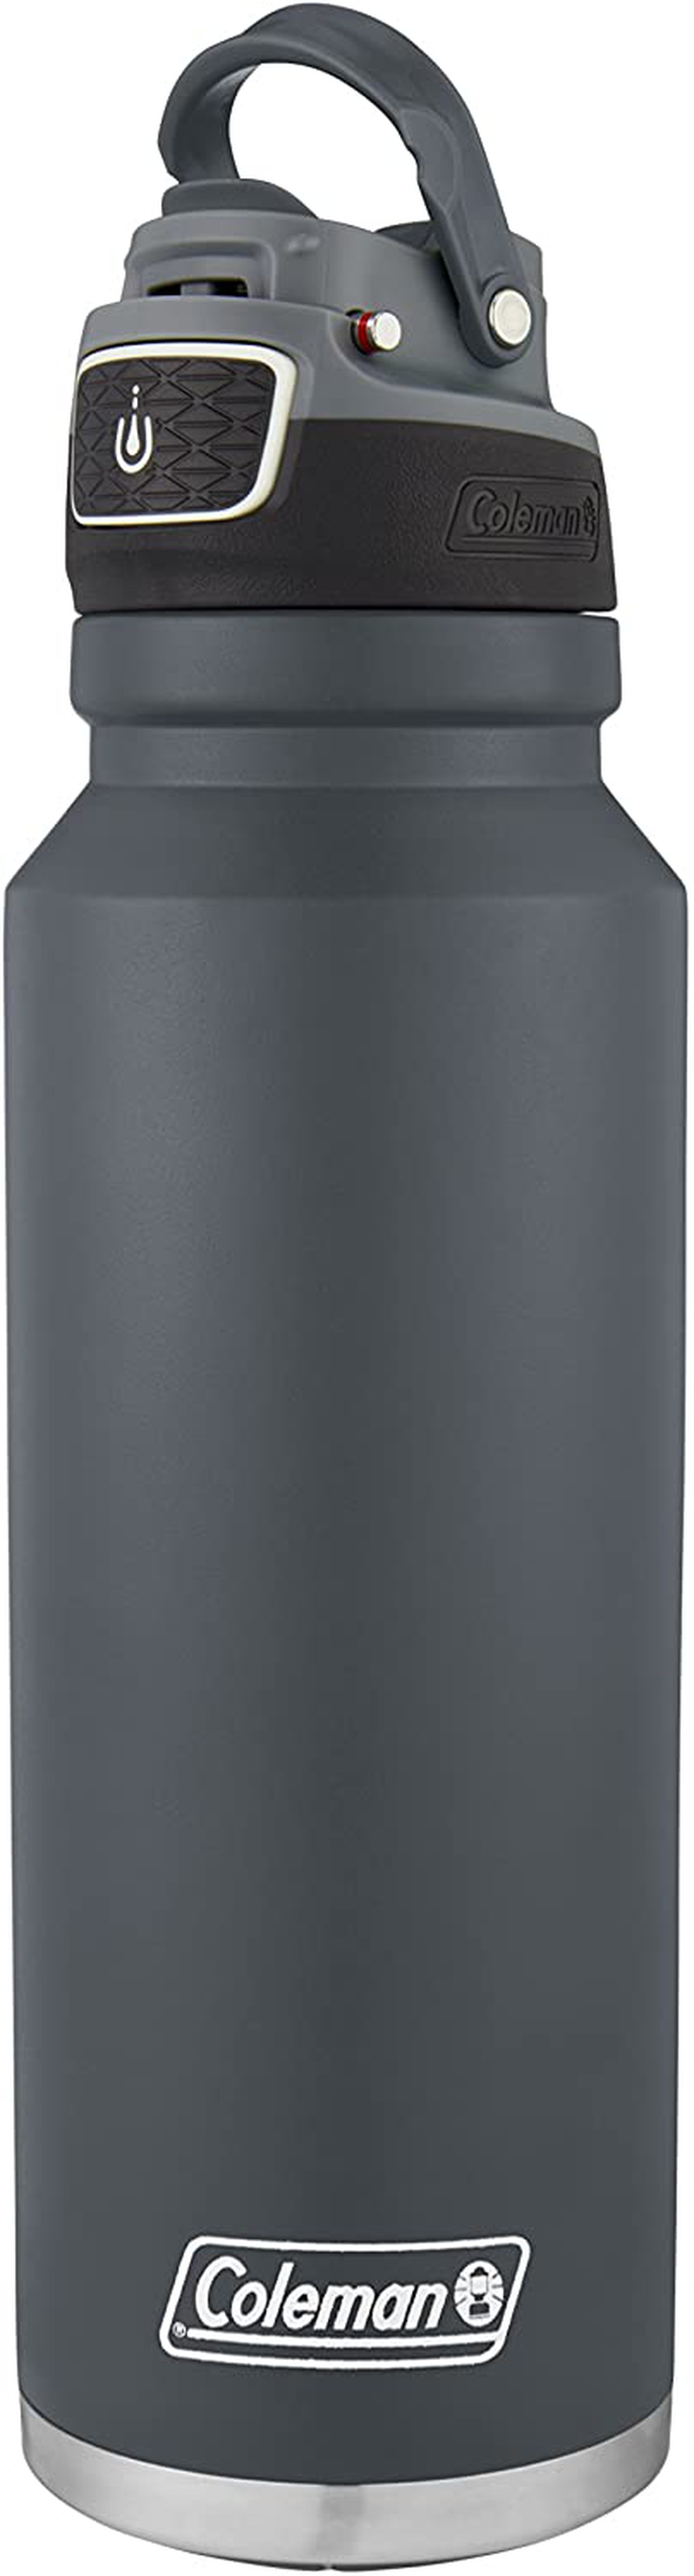 Coleman Autoseal FreeFlow Stainless Steel Insulated Water Bottle